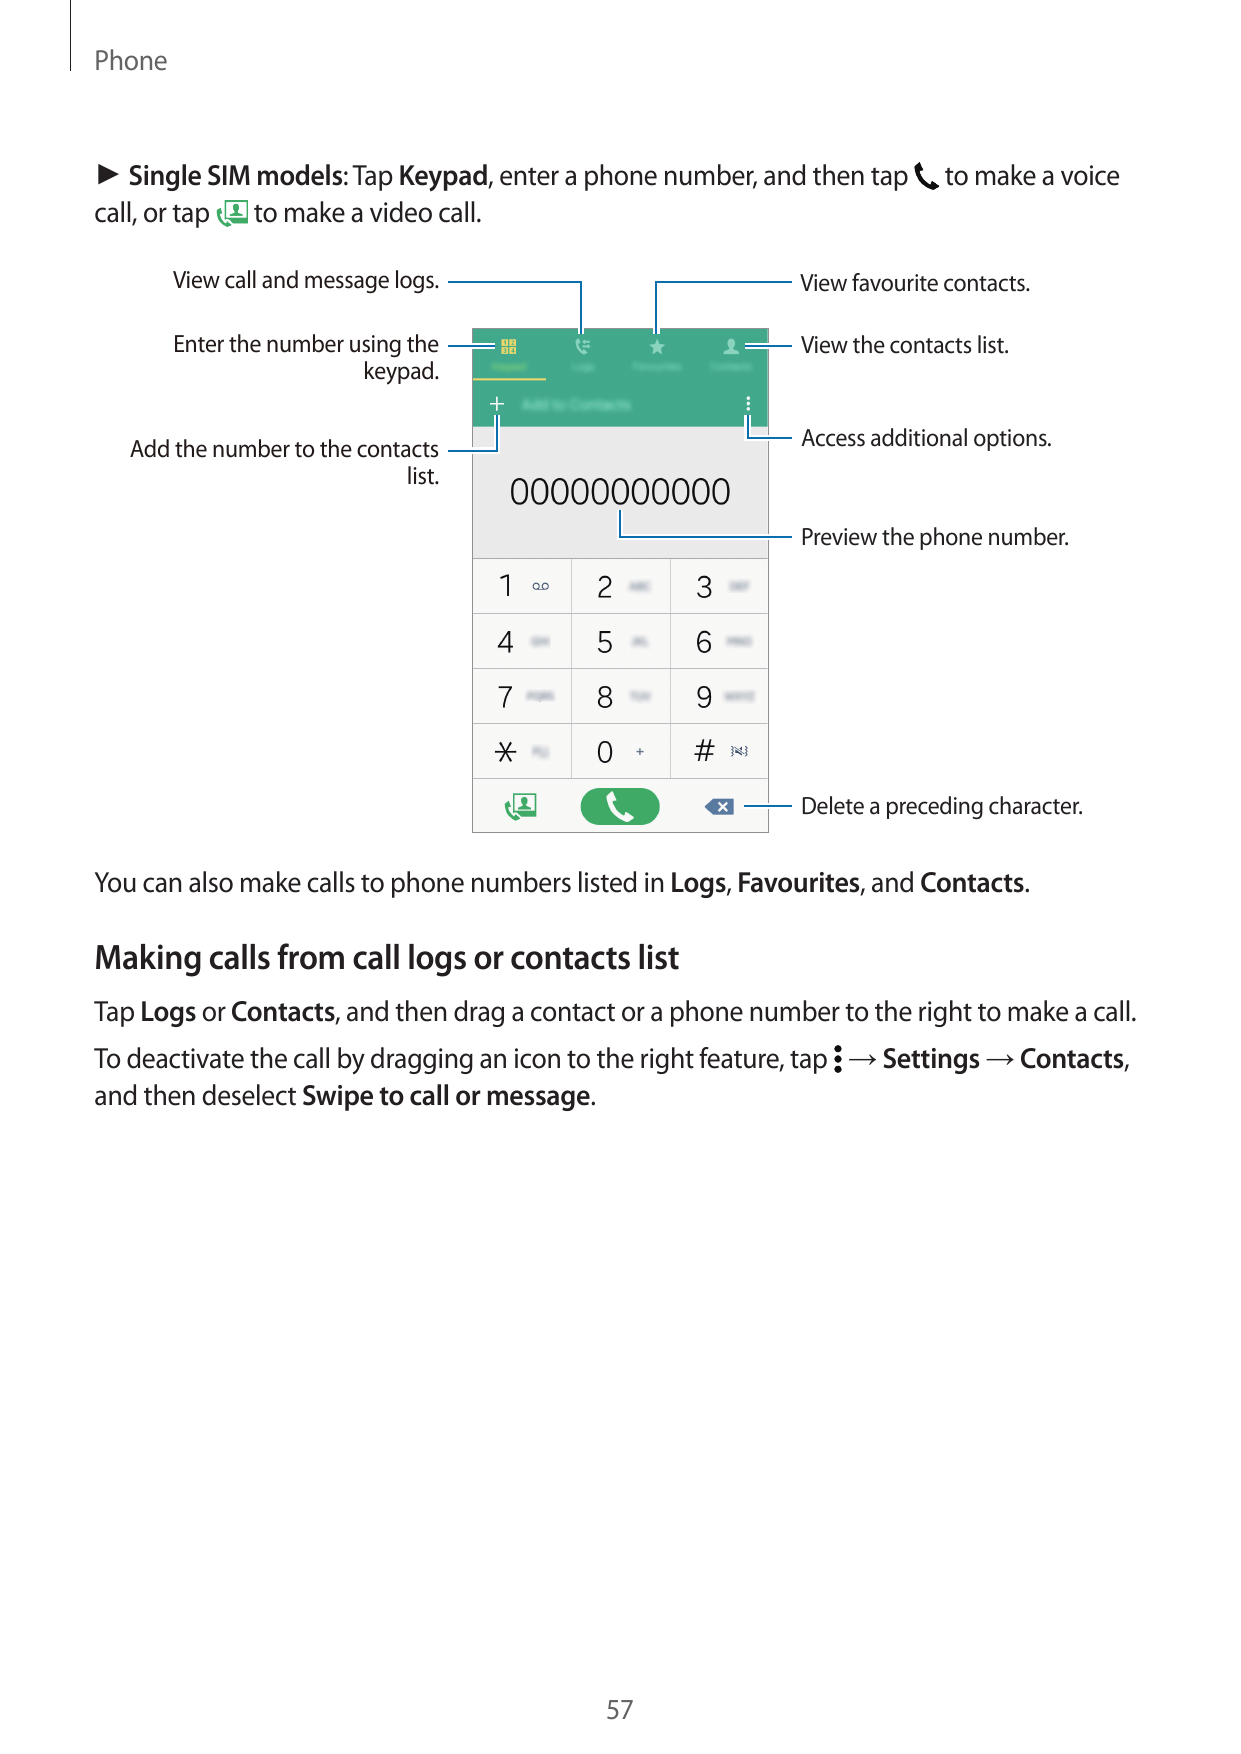 Phone► Single SIM models: Tap Keypad, enter a phone number, and then tapcall, or tap to make a video call.to make a voiceView ca